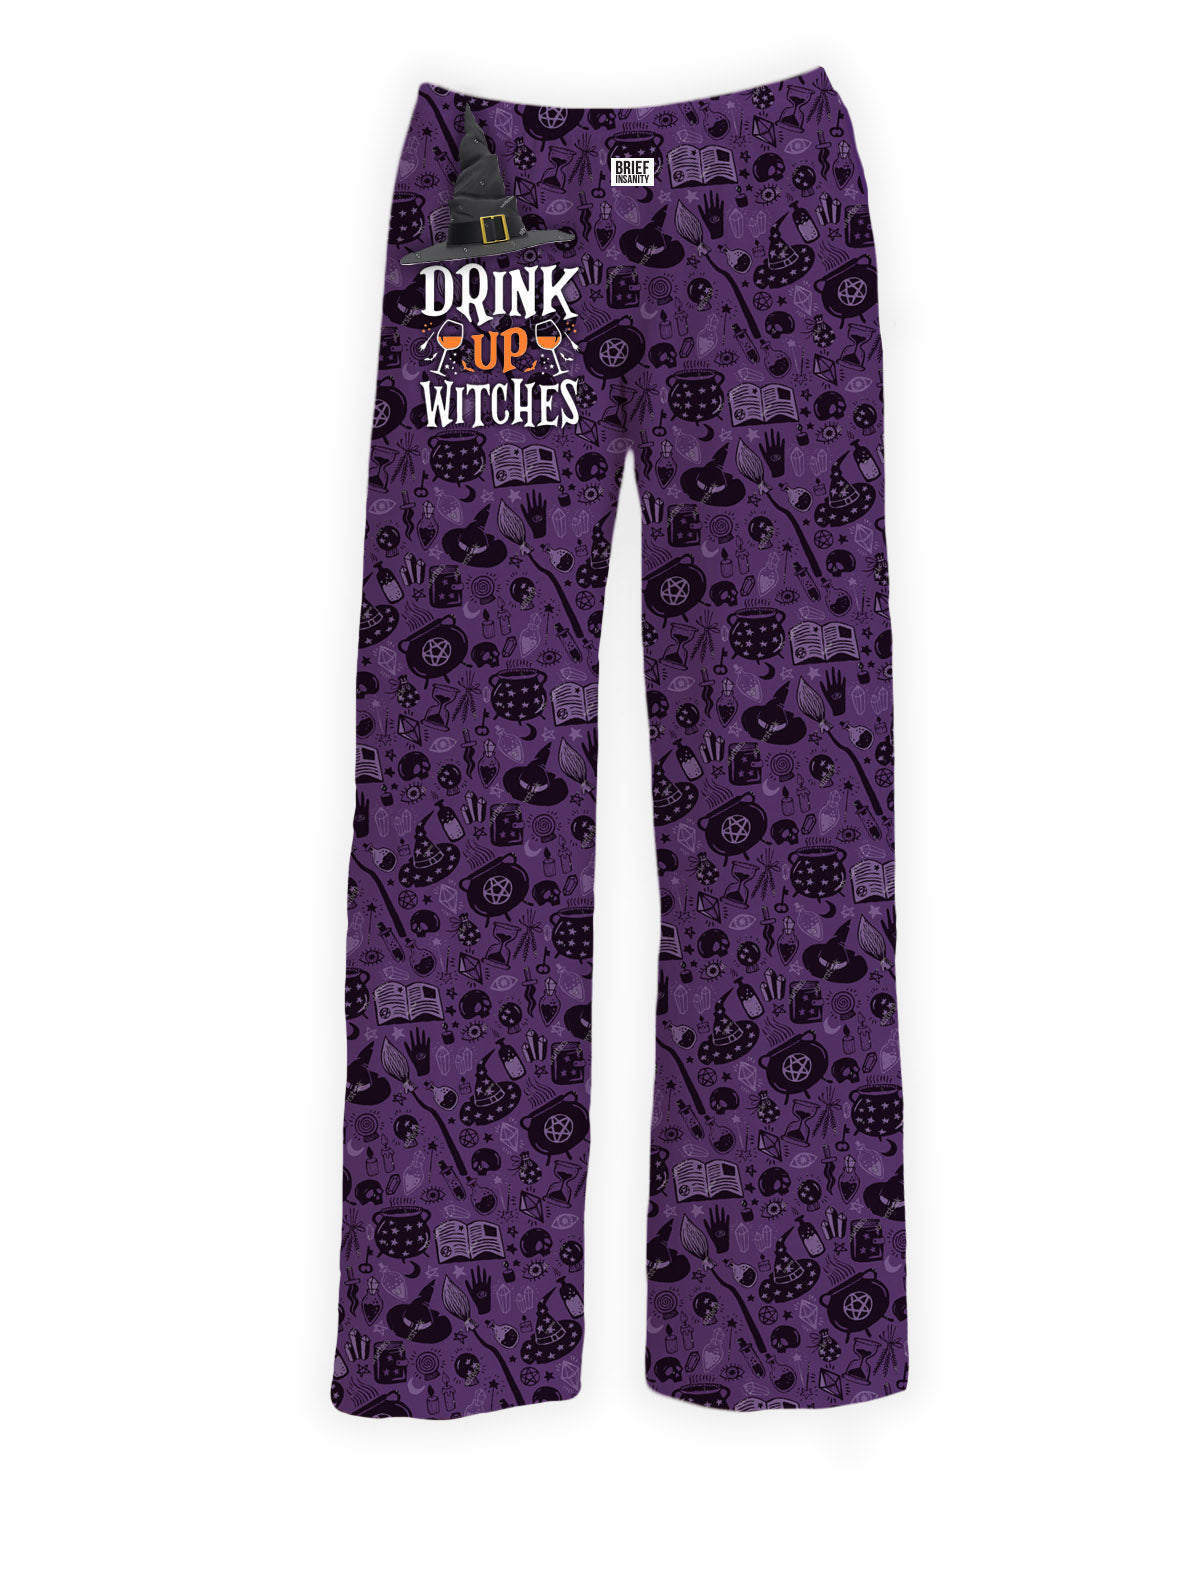 BRIEF INSANITY Drink Up Witches Pajama Lounge Pants